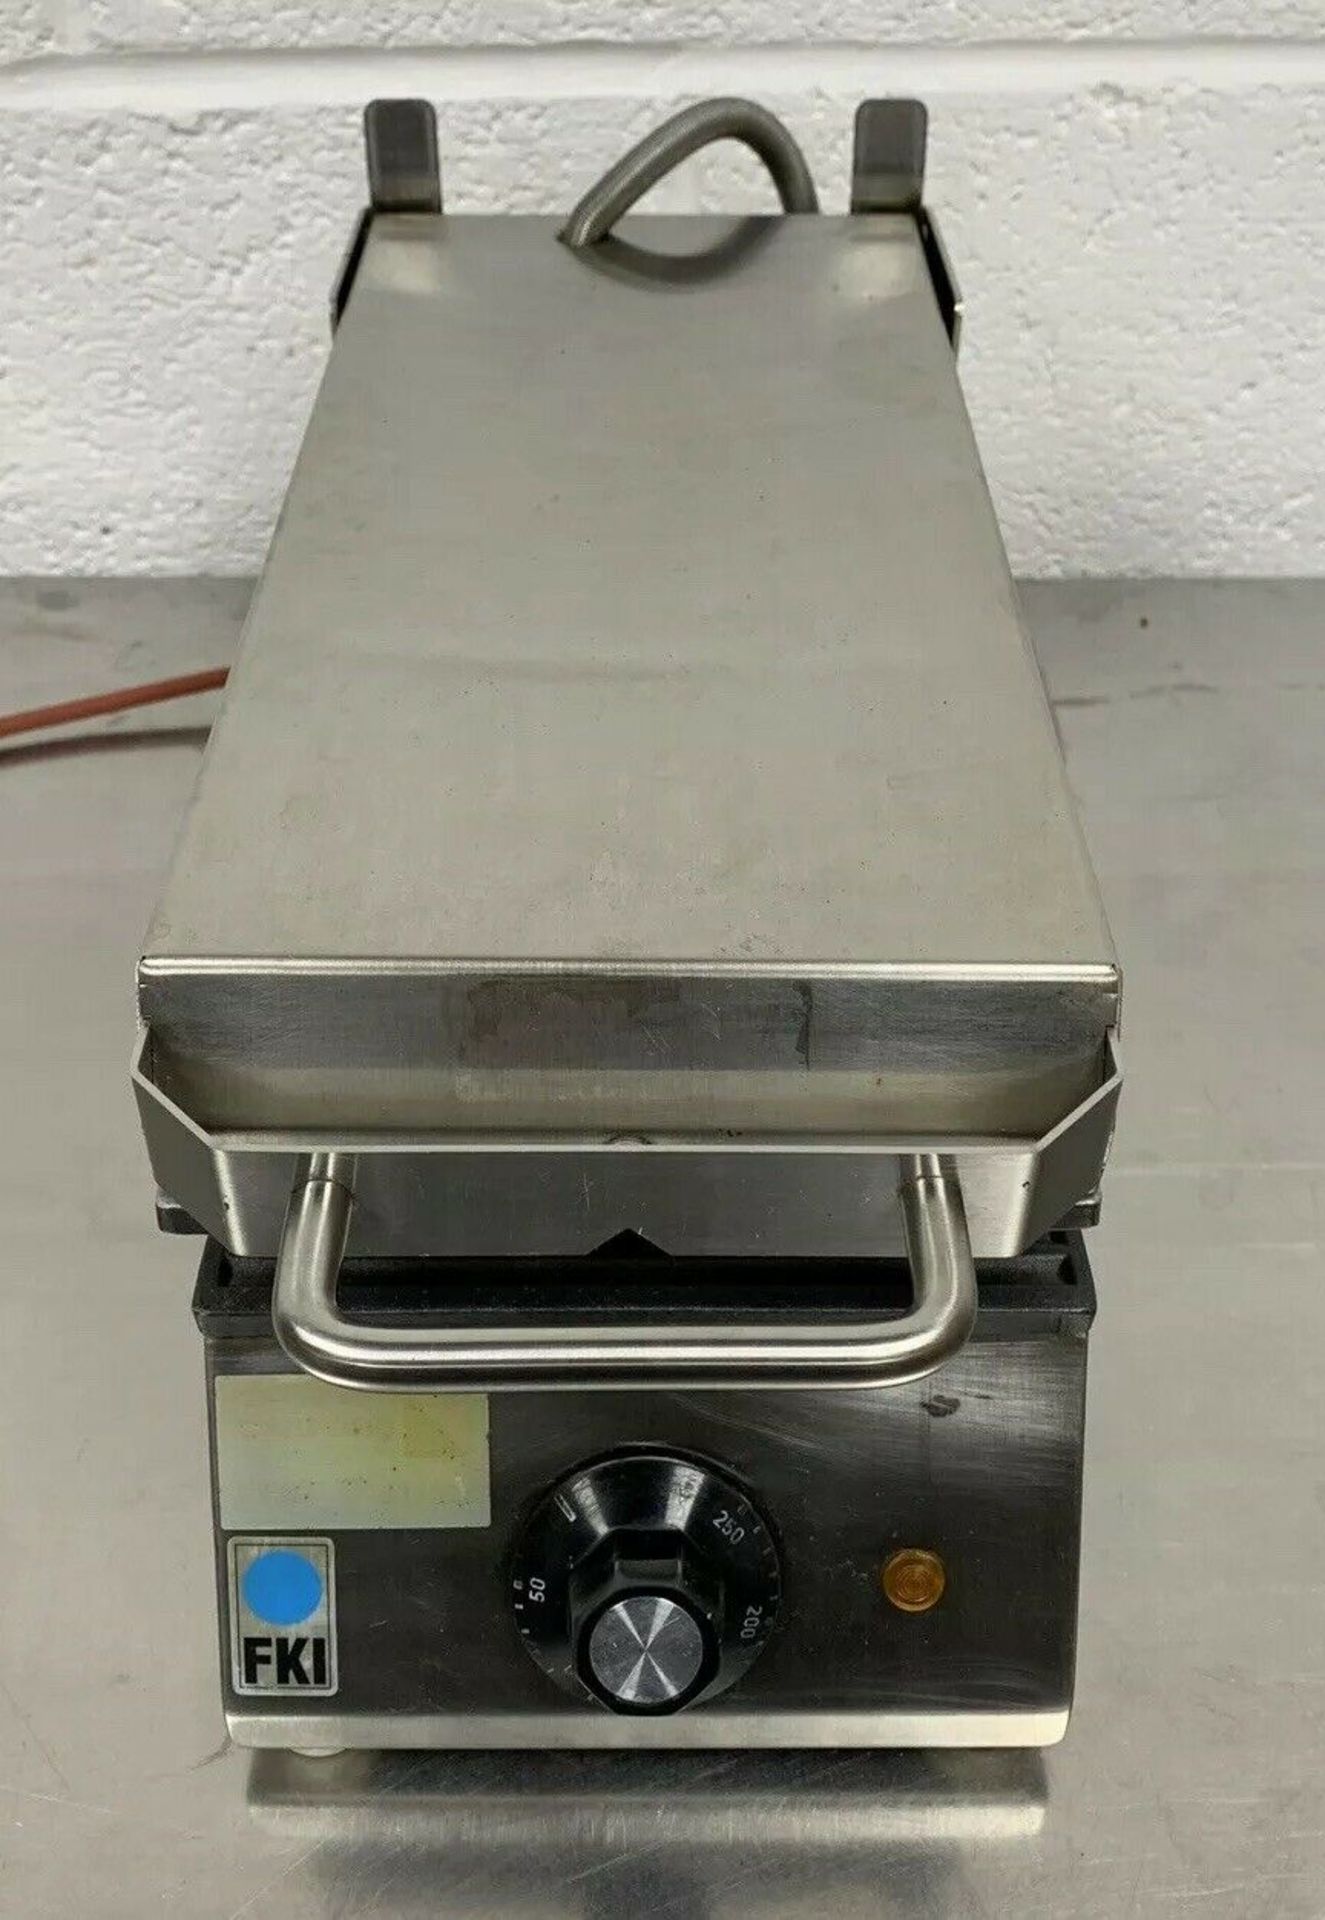 FKI TM05 Double Contact Panini Grill - Image 2 of 4